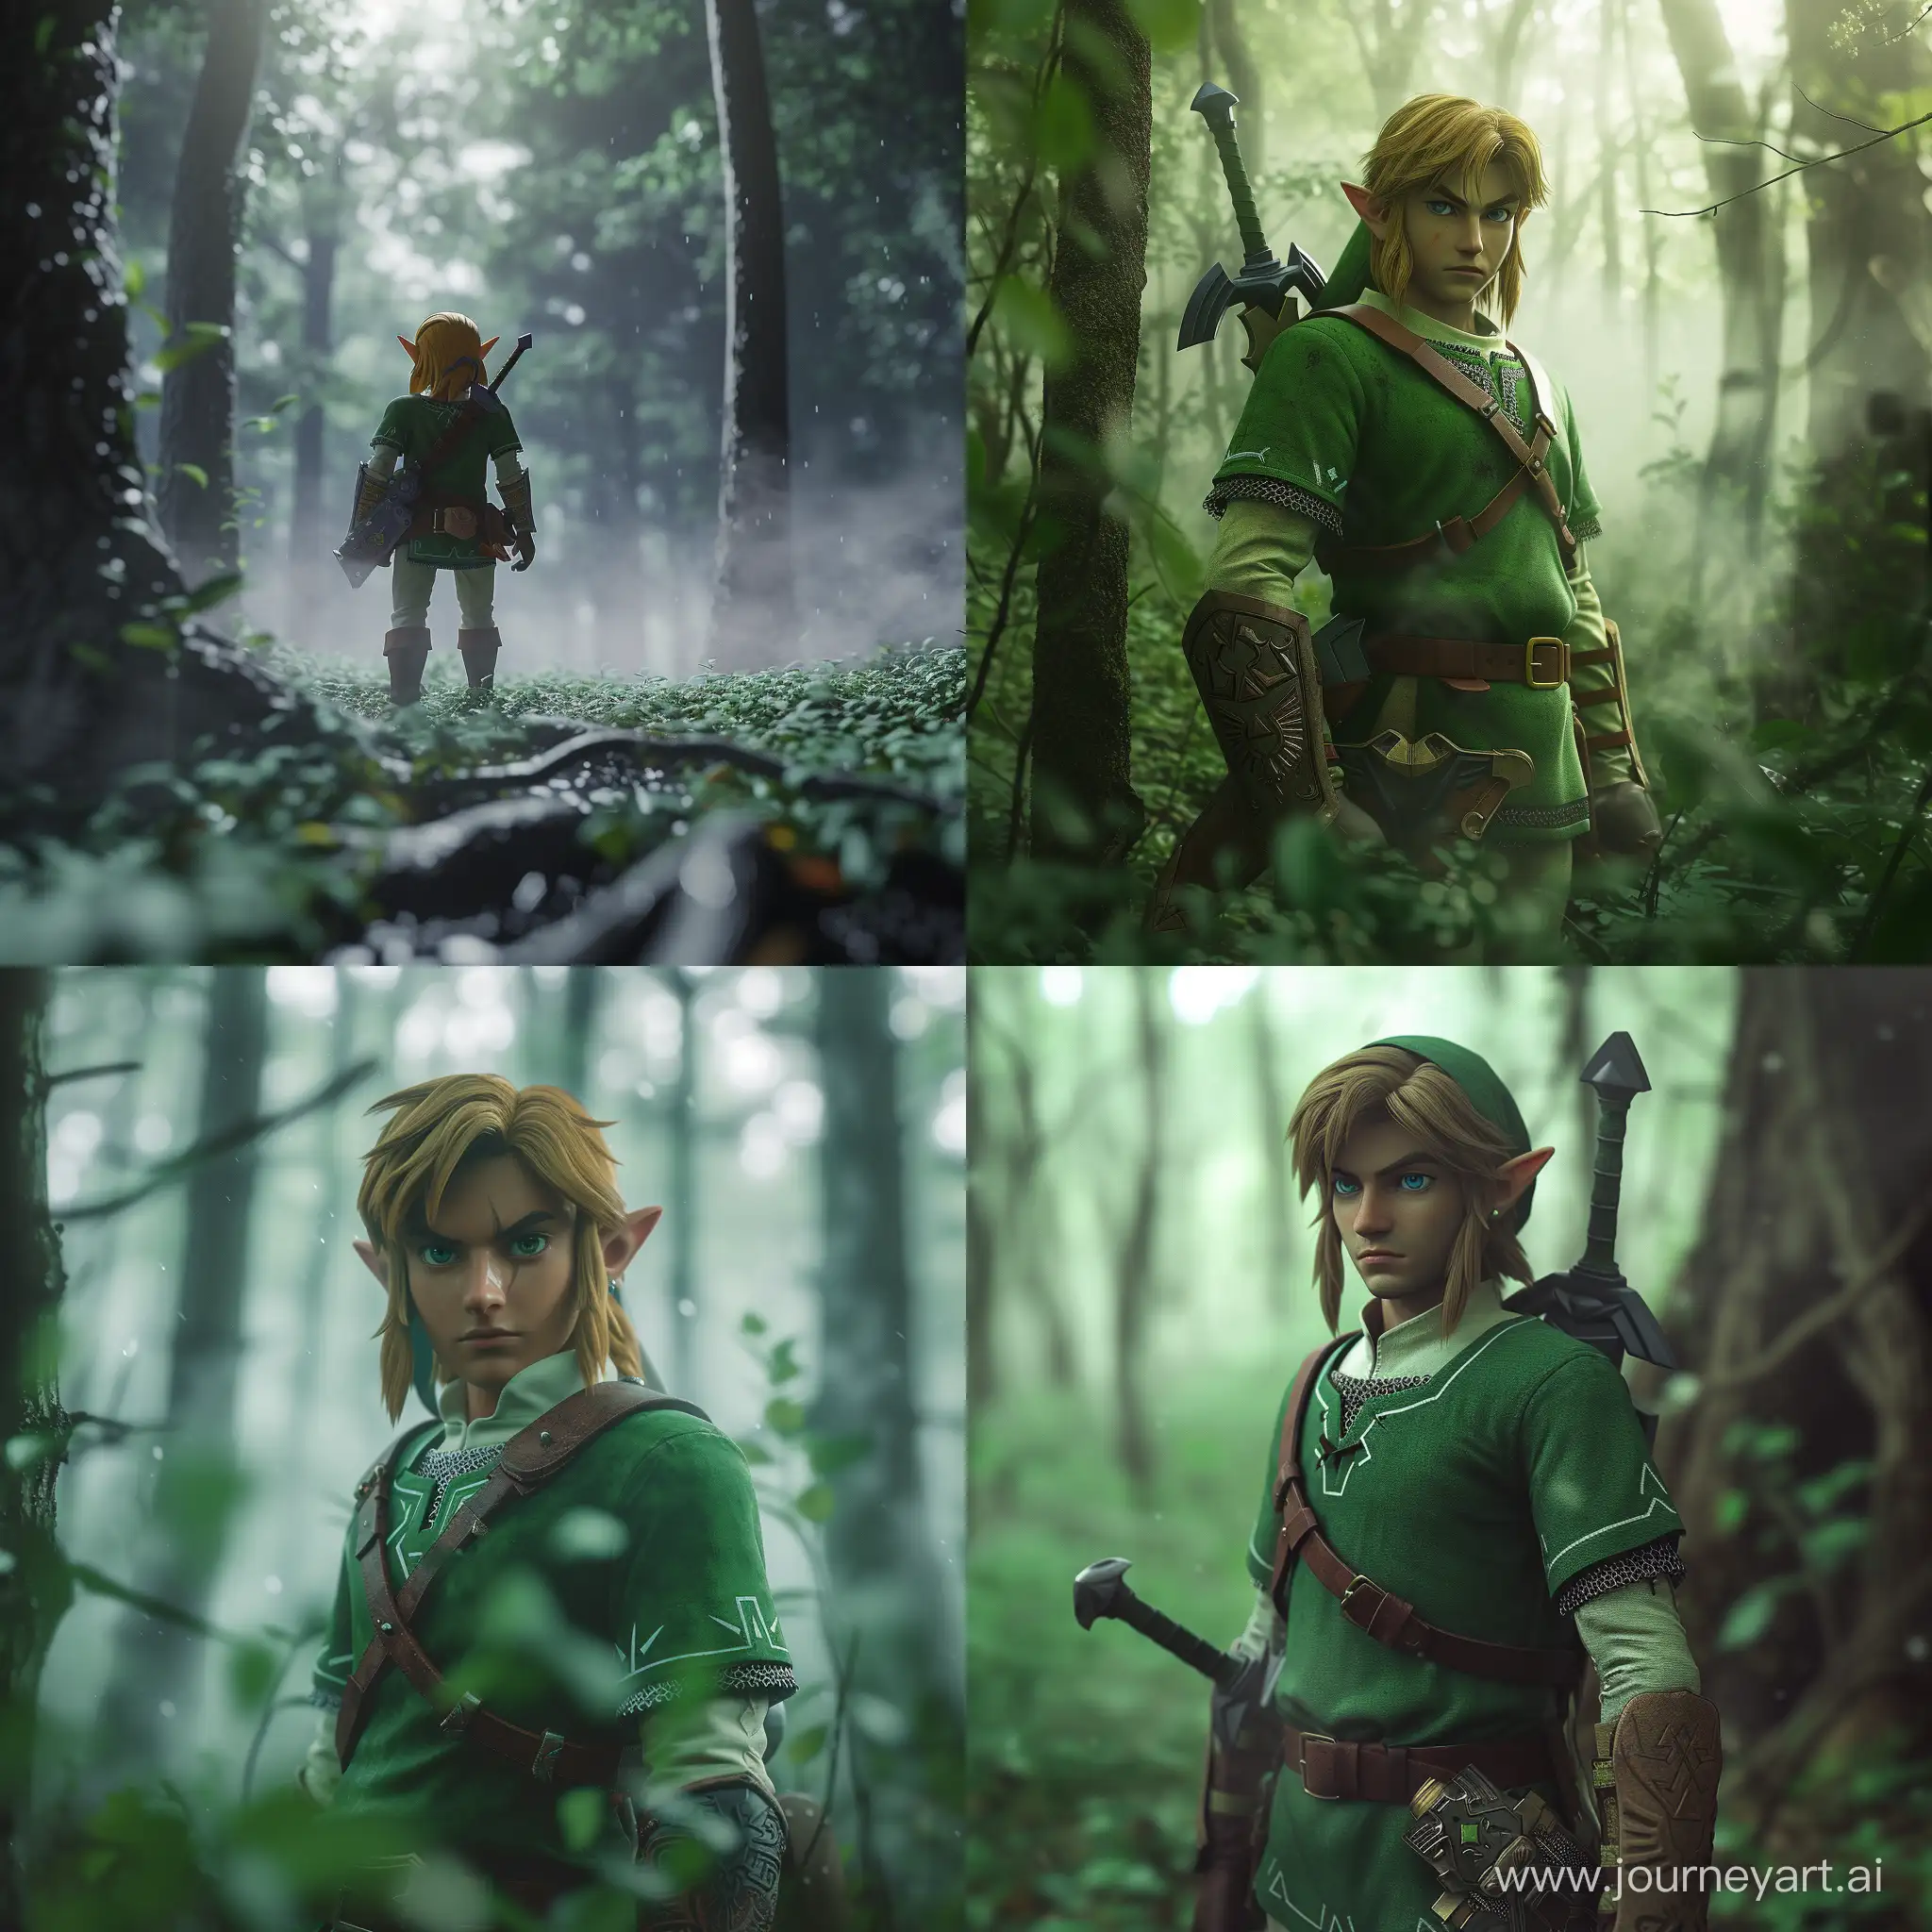 Realistic-Zelda-Character-in-Enchanted-Forest-with-Mist